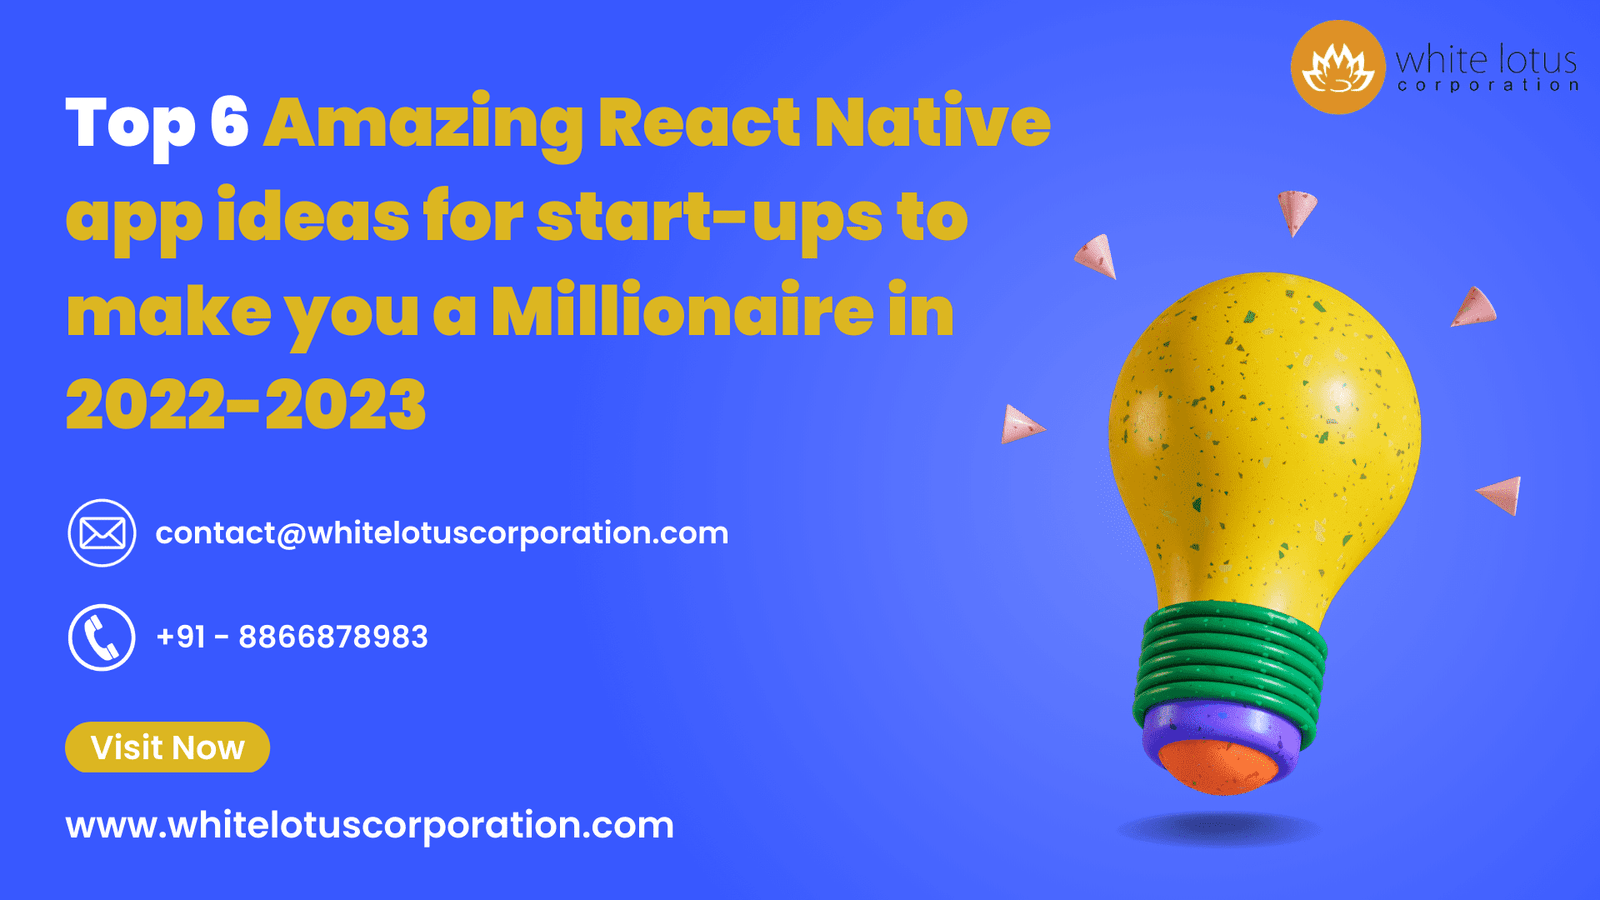 Top 6 Amazing React Native app ideas for start-ups to make you a Millionaire in 2022-2023 (1)